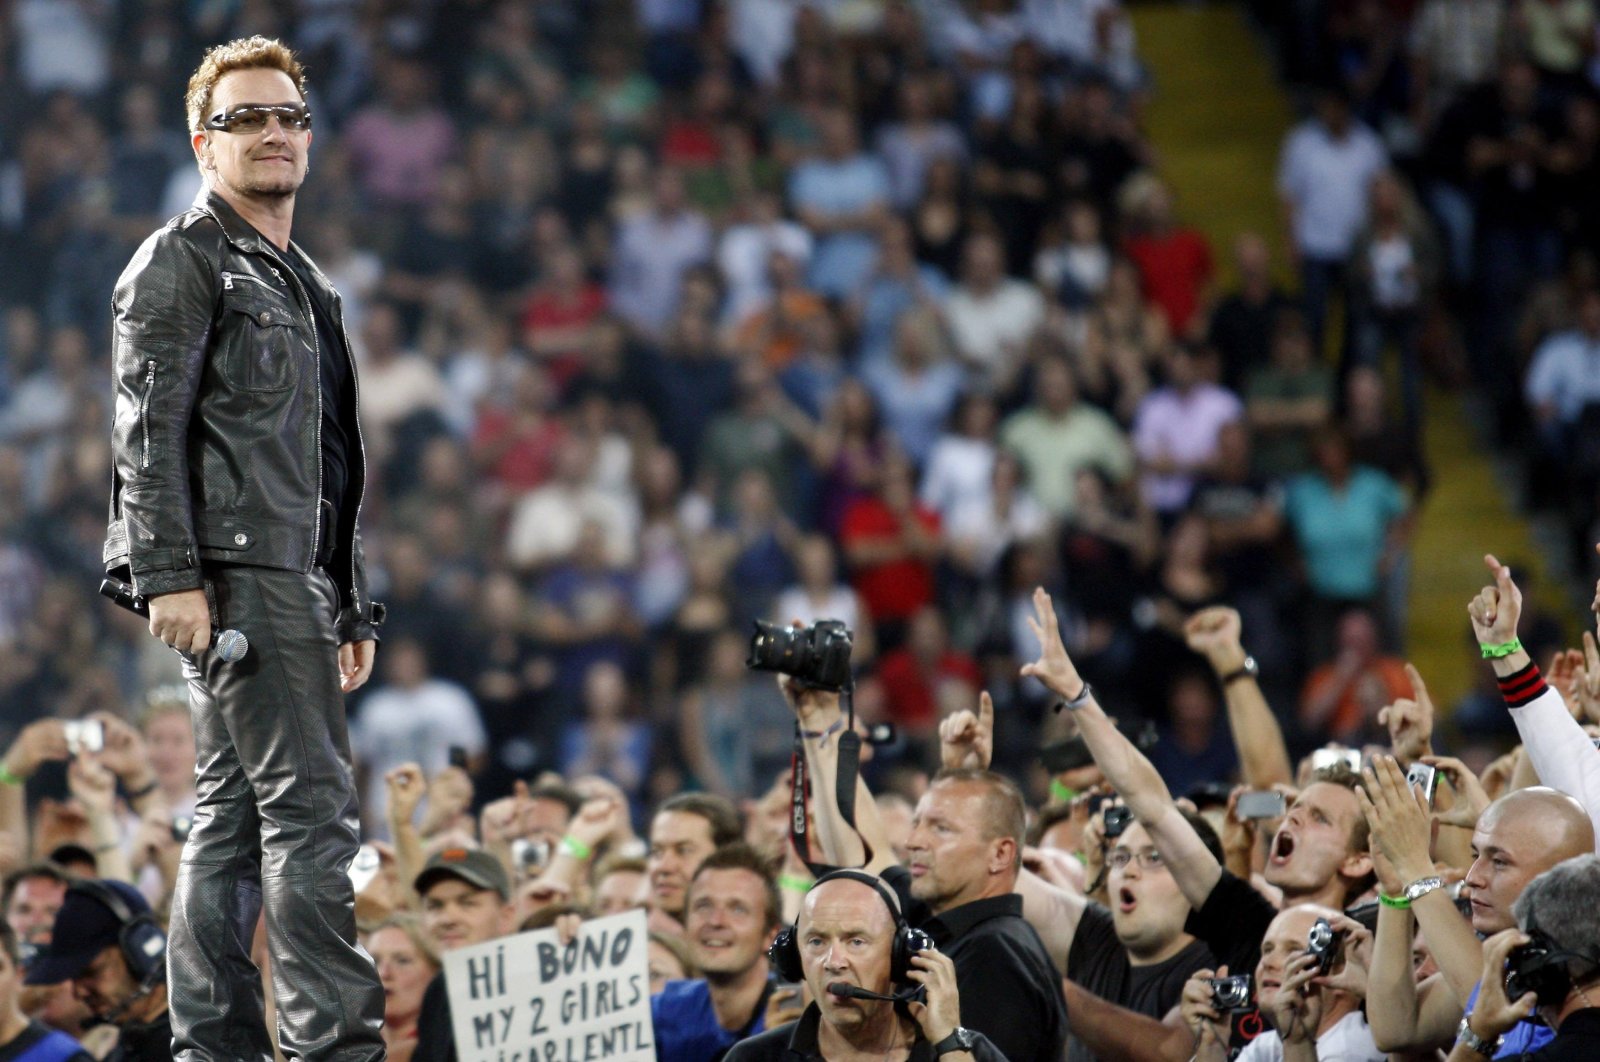 Bono performs during U2&#039;s 360 Degree Tour at the Commerzbank Arena in Frankfurt, Germany, Aug. 10, 2010. (REUTERS Photo) 